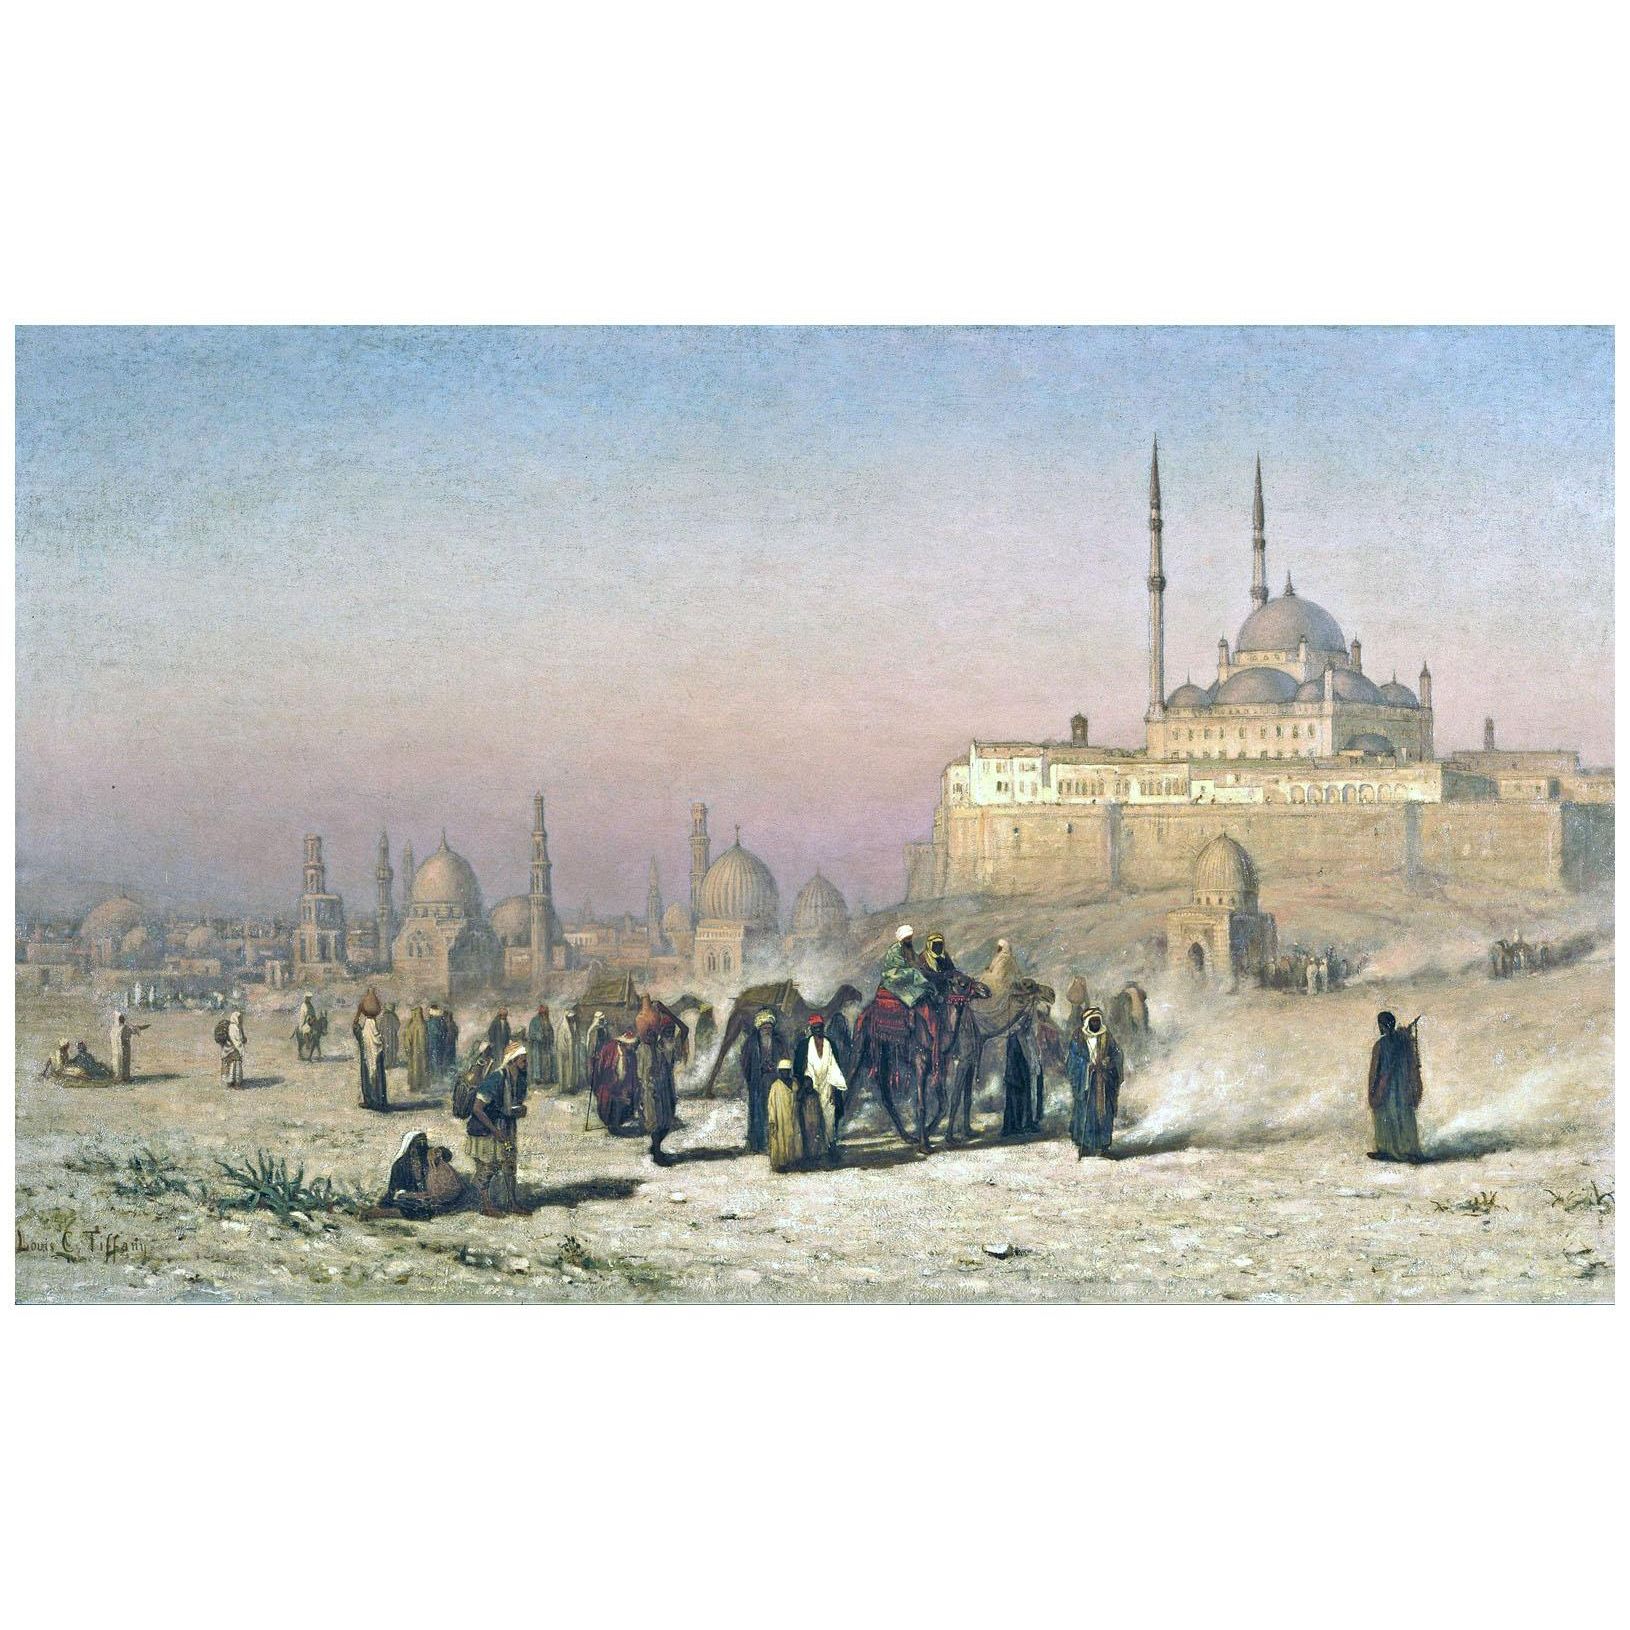 Louis Tiffany. On the Way between Old and New Cairo. 1872. Brooklyn Myseum